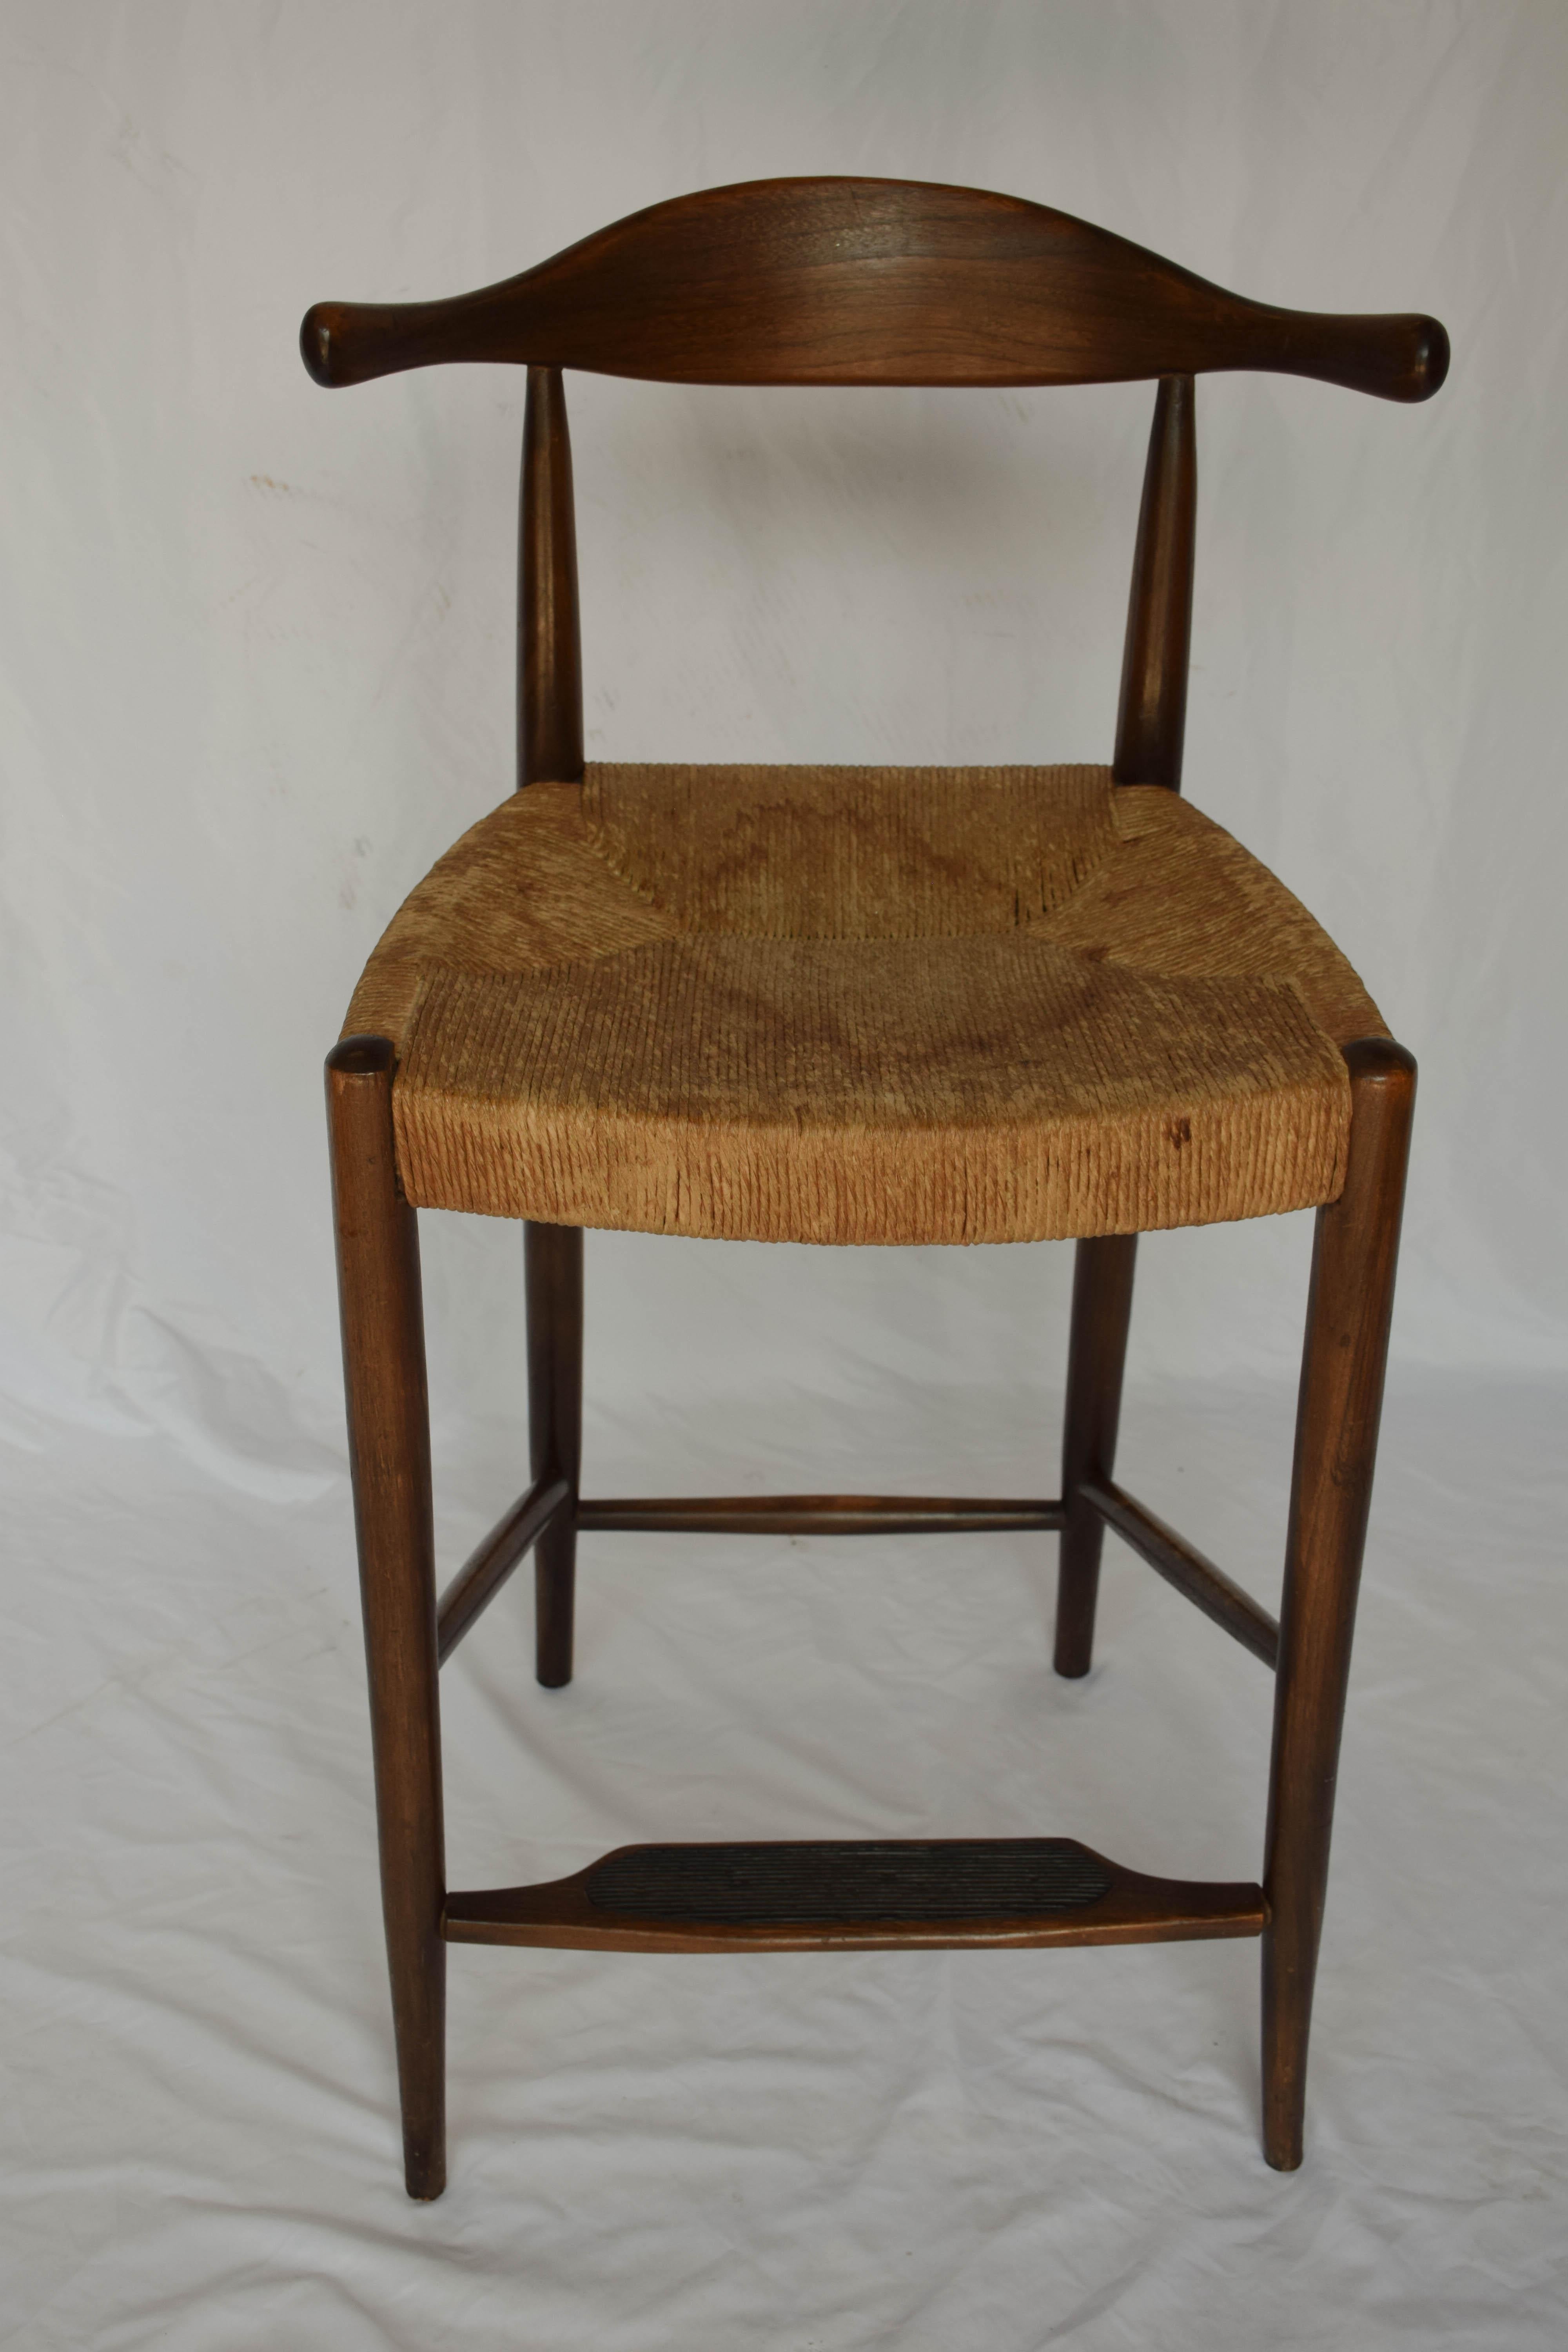 This is a pair of midcentury Danish Modern Hans Wegner style cow horn (OX Bow) counter height bar stools. Created between 1950 and 1960, the stools are made of teak wood and have a rush seat. The base has a asymmetrical design with a rubber pad on